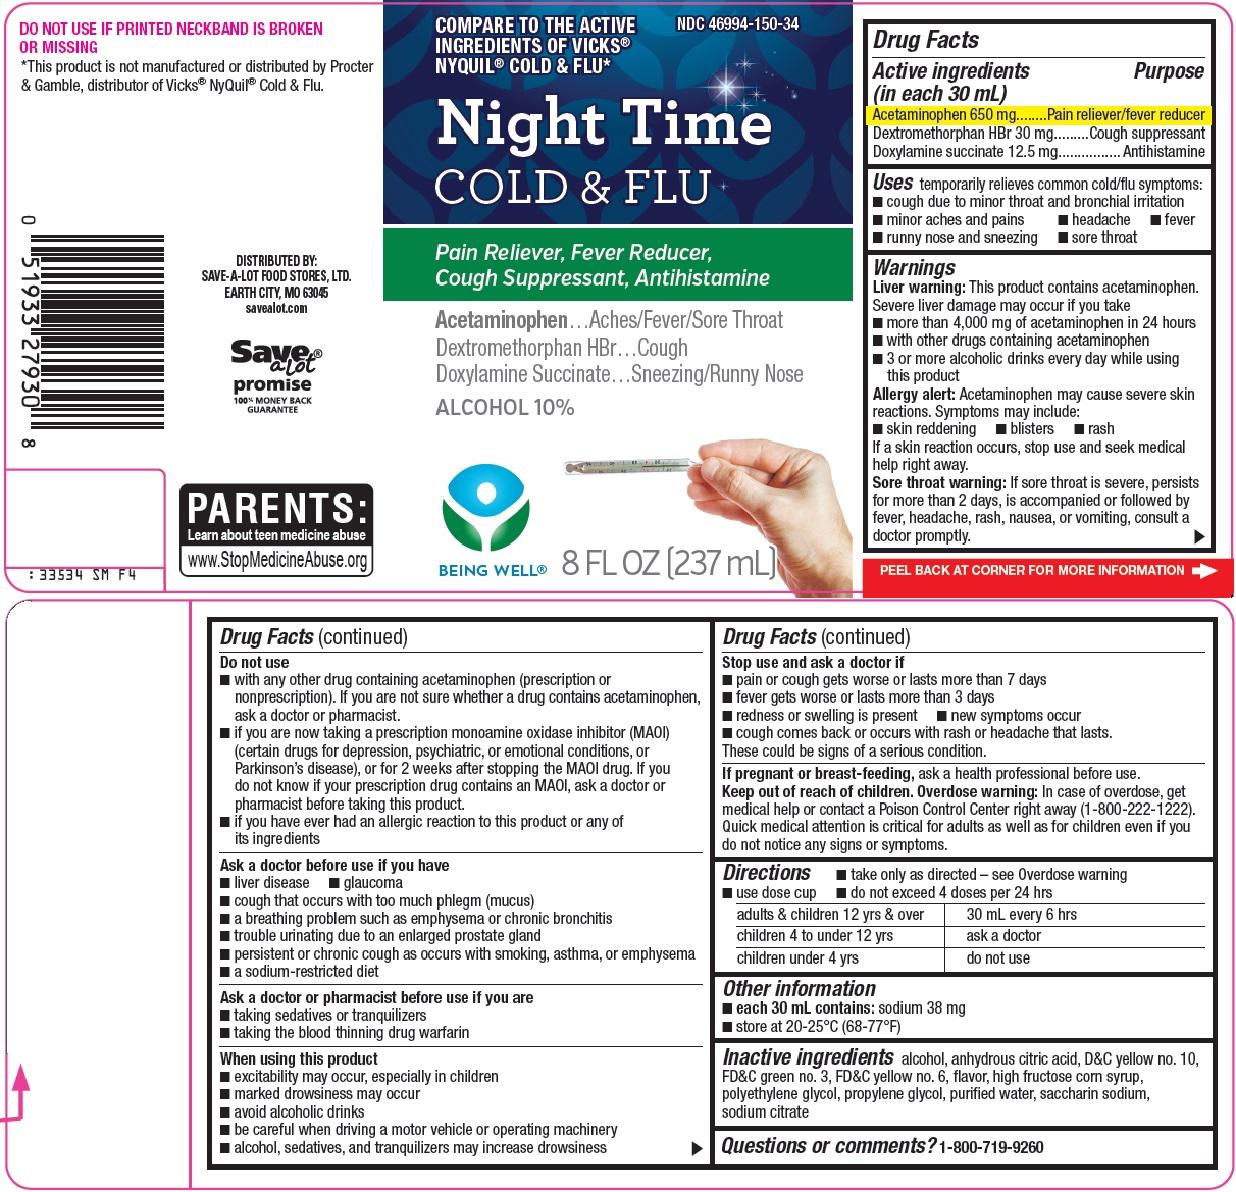 Being Well Night Time Cold & Flu image